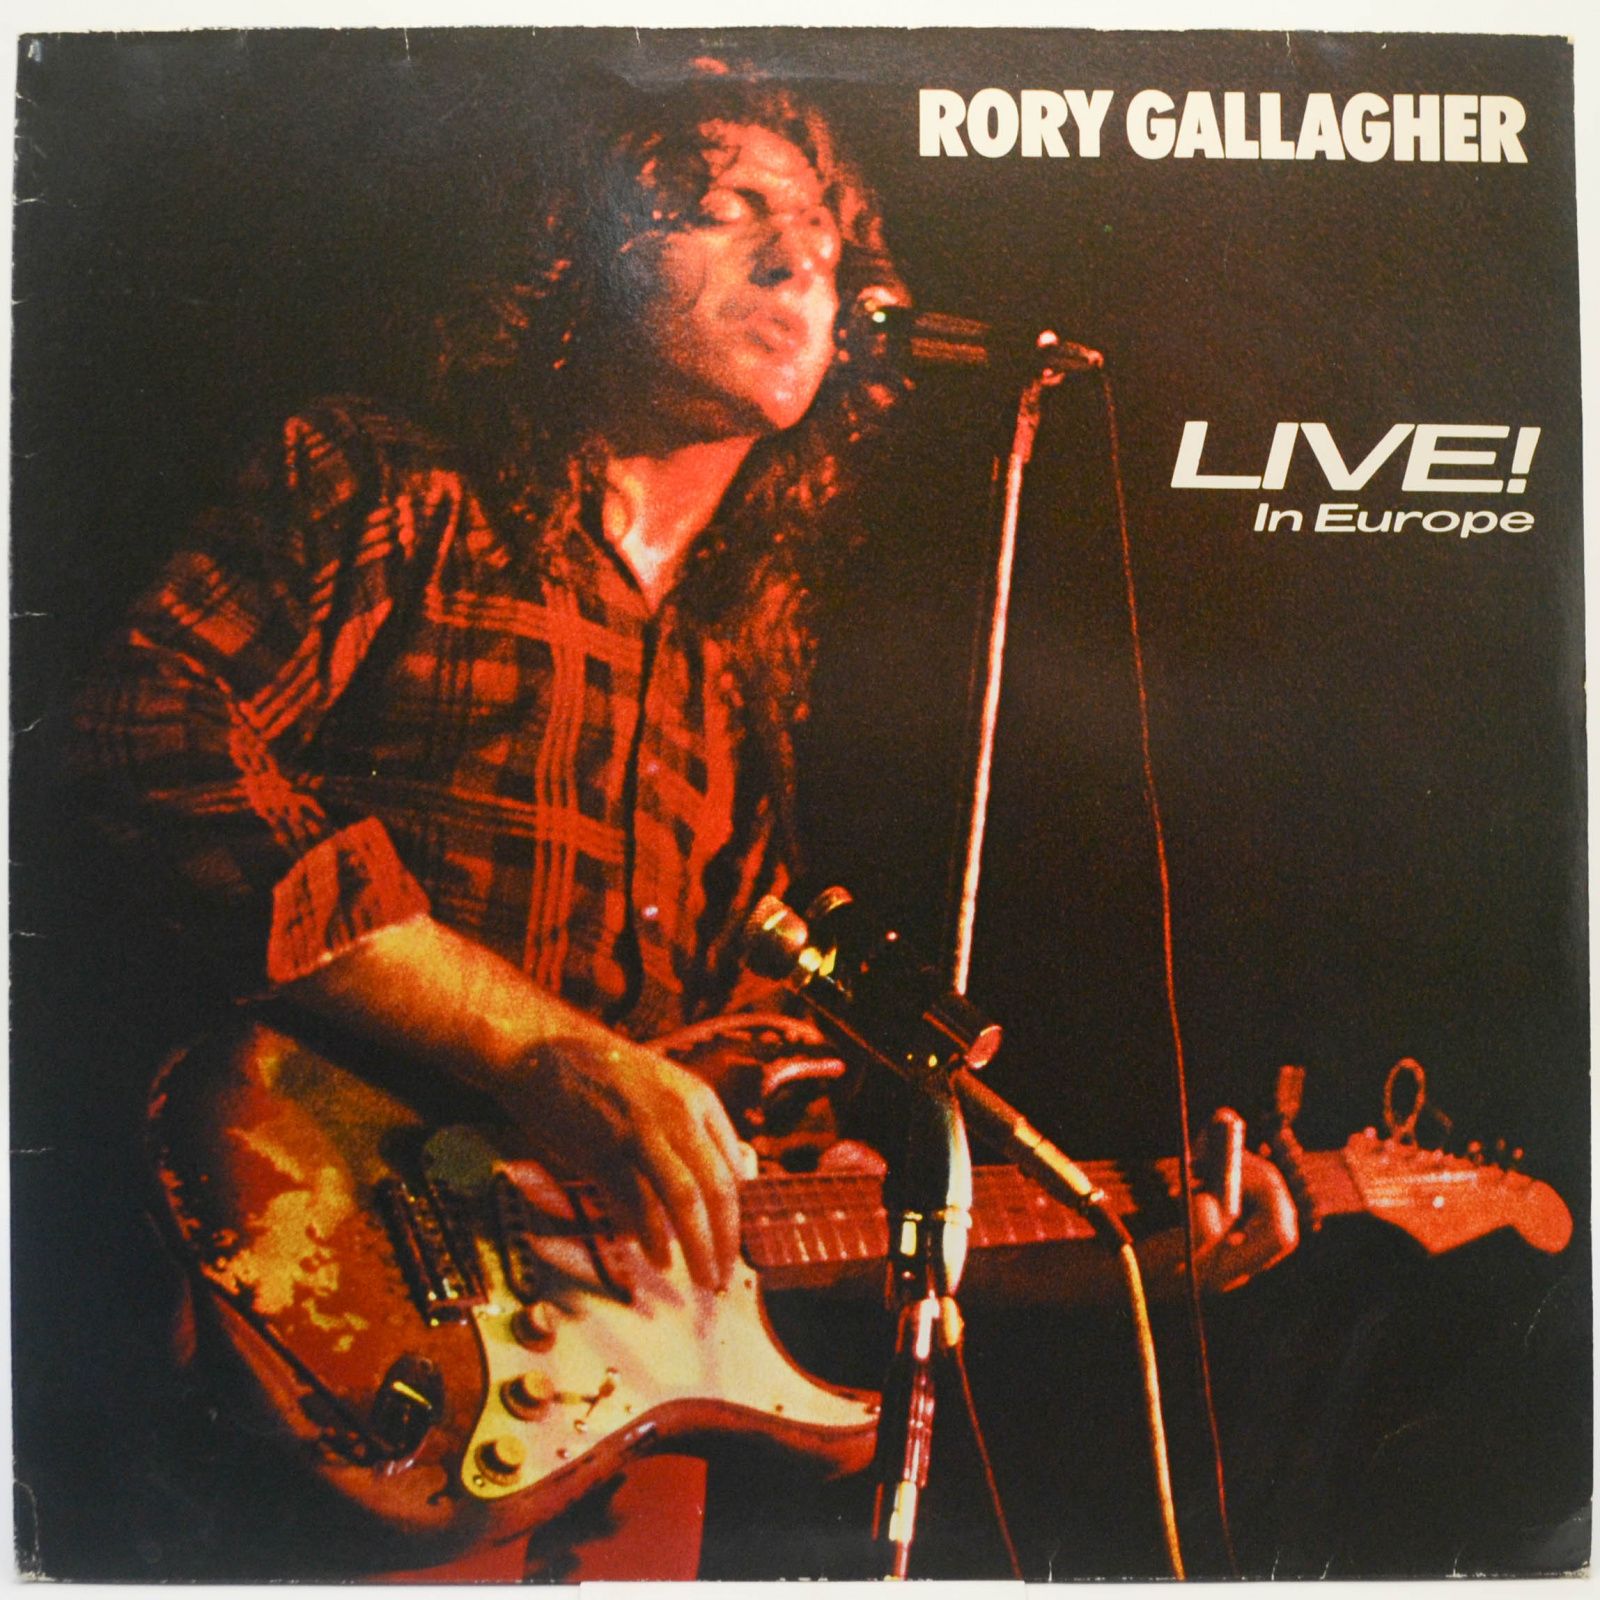 Rory Gallagher — Live! In Europe, 1980